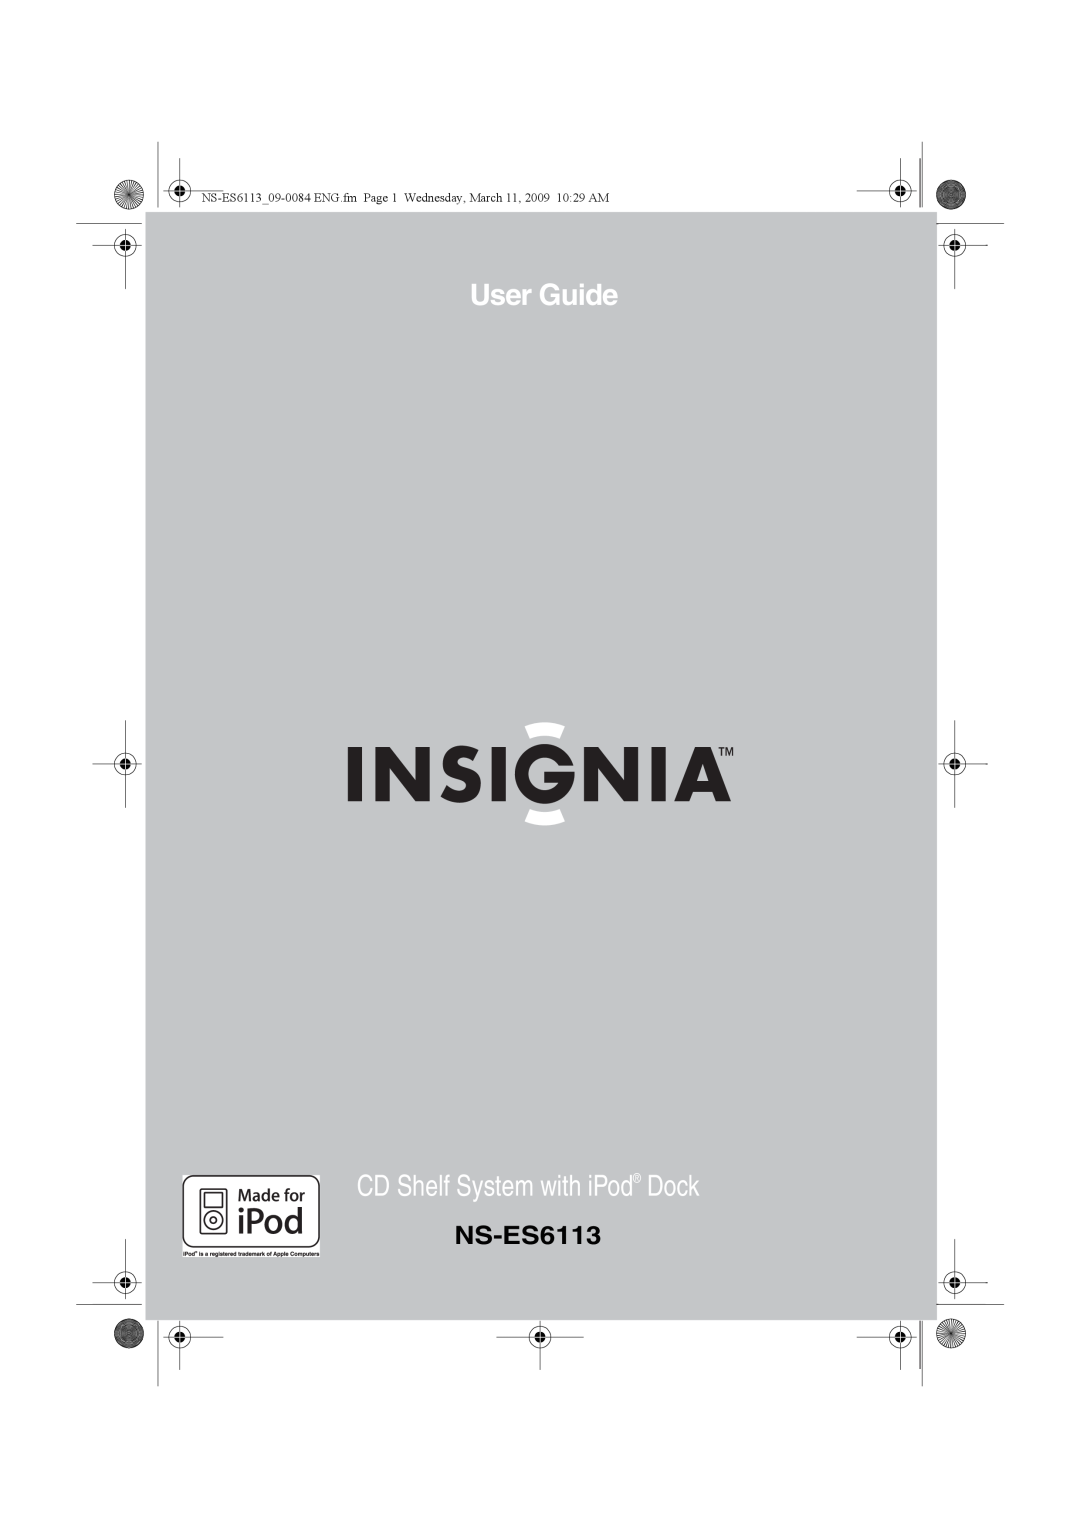 Insignia NS-ES6113 manual User Guide, CD Shelf System with iPod Dock 